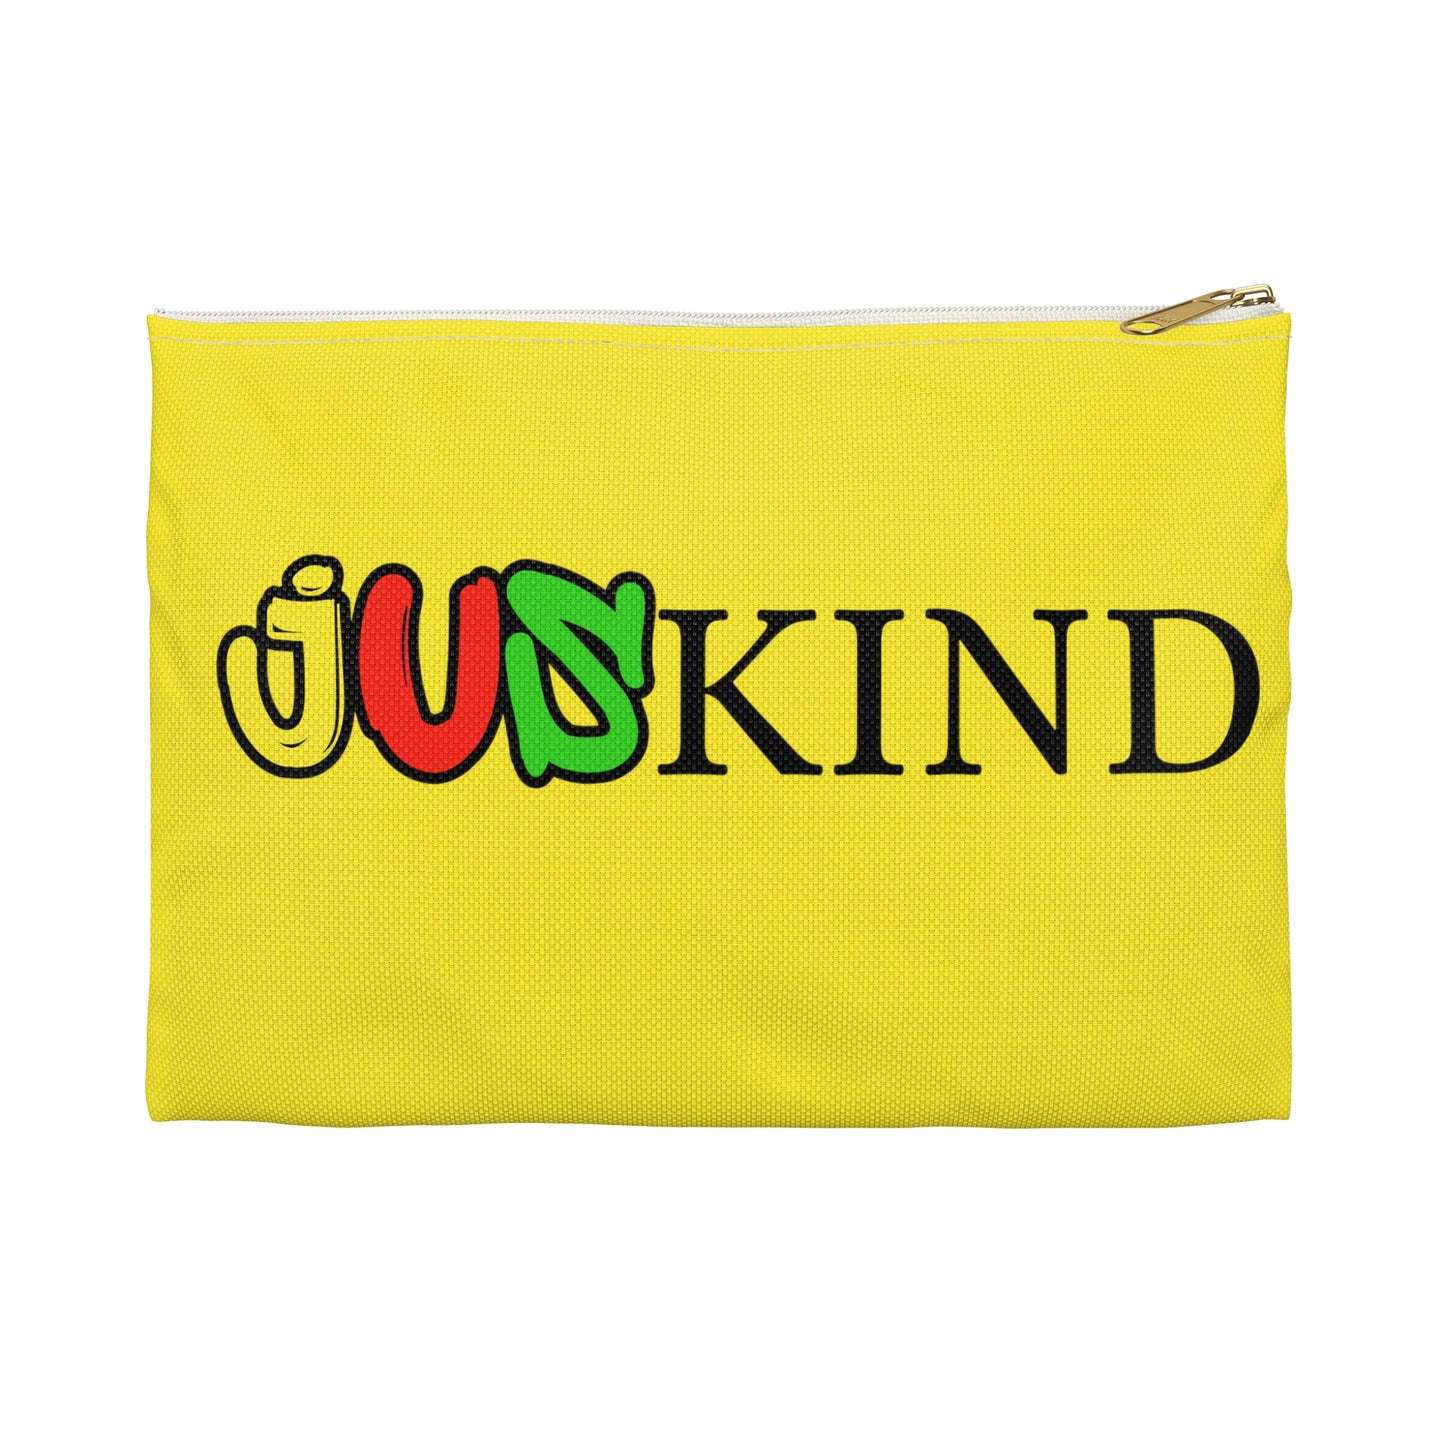 JusKind Accessory Pouch (Yellow)